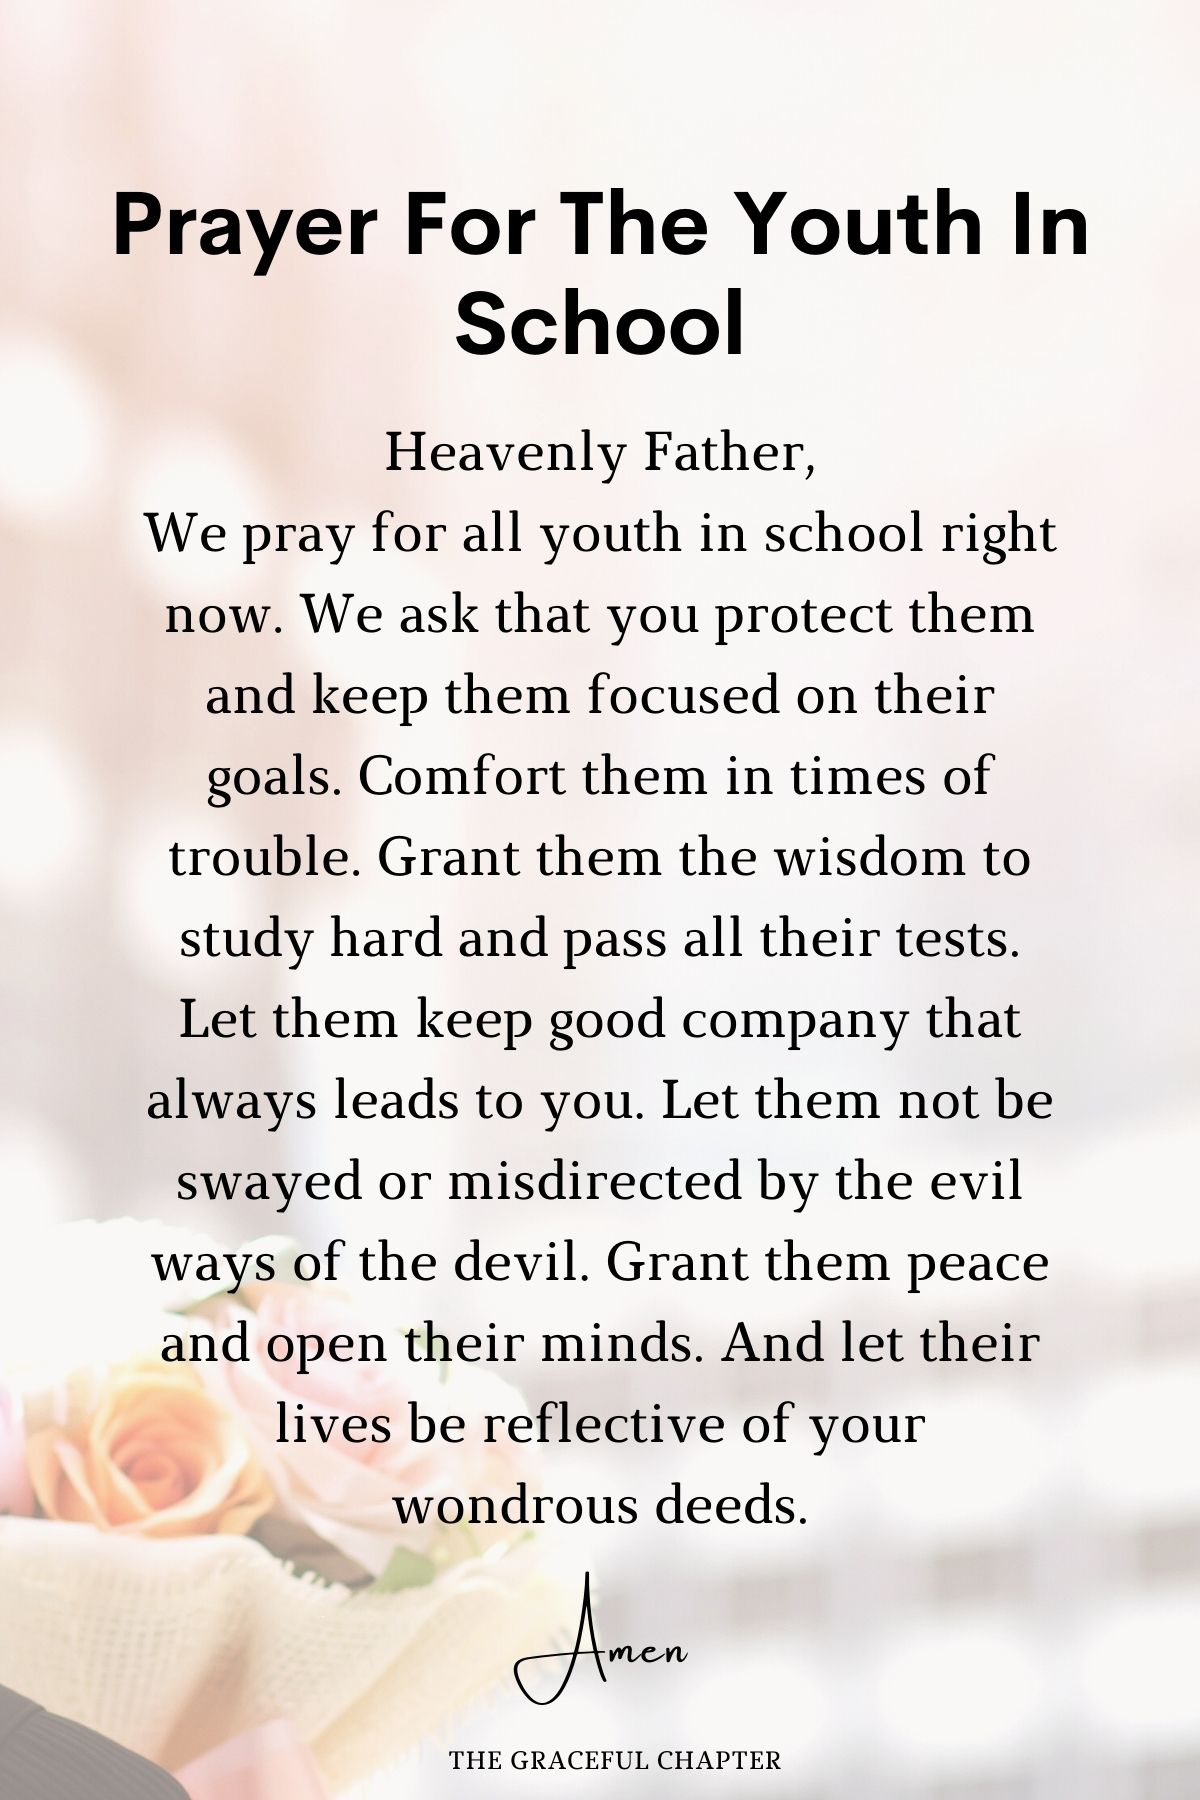 Prayer for the youth in school